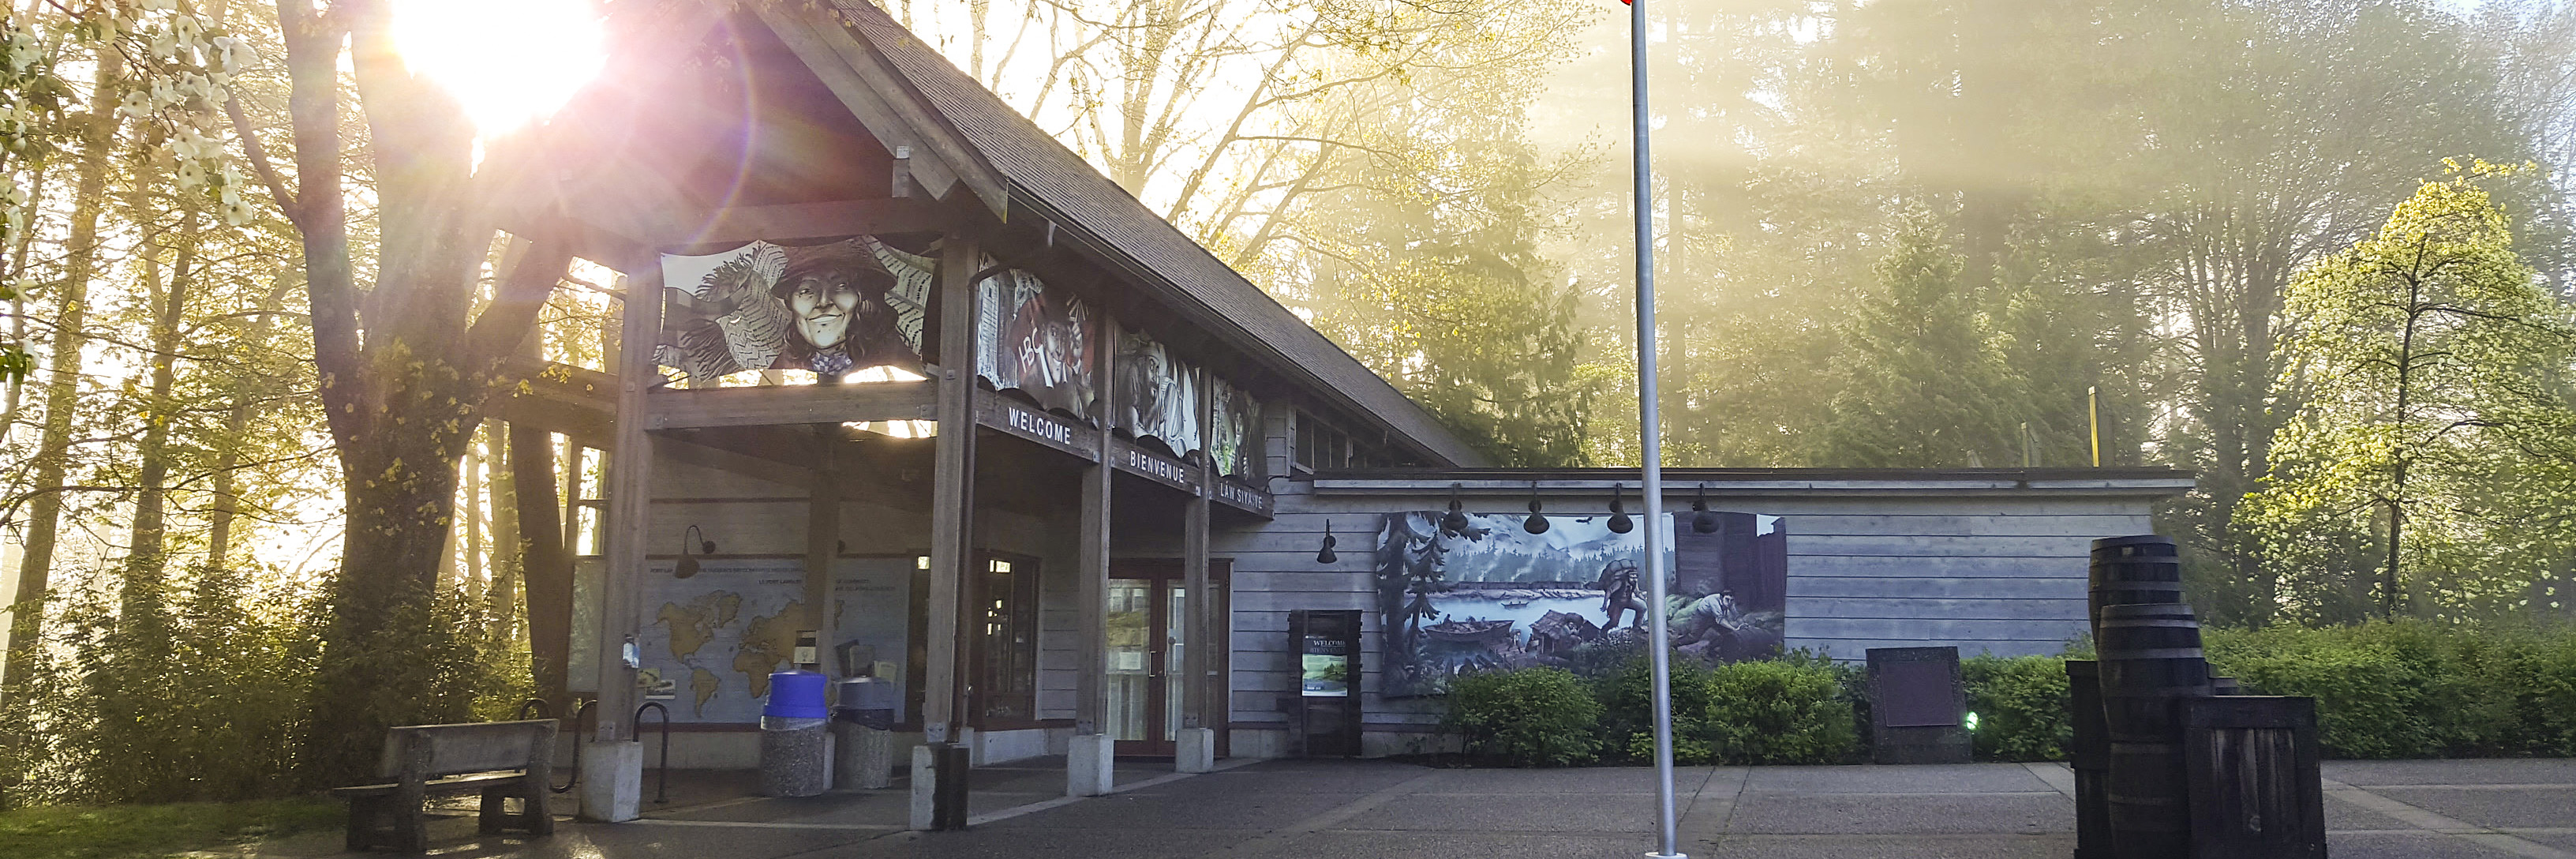 Visitor Centre at Fort Langley National Historic Site